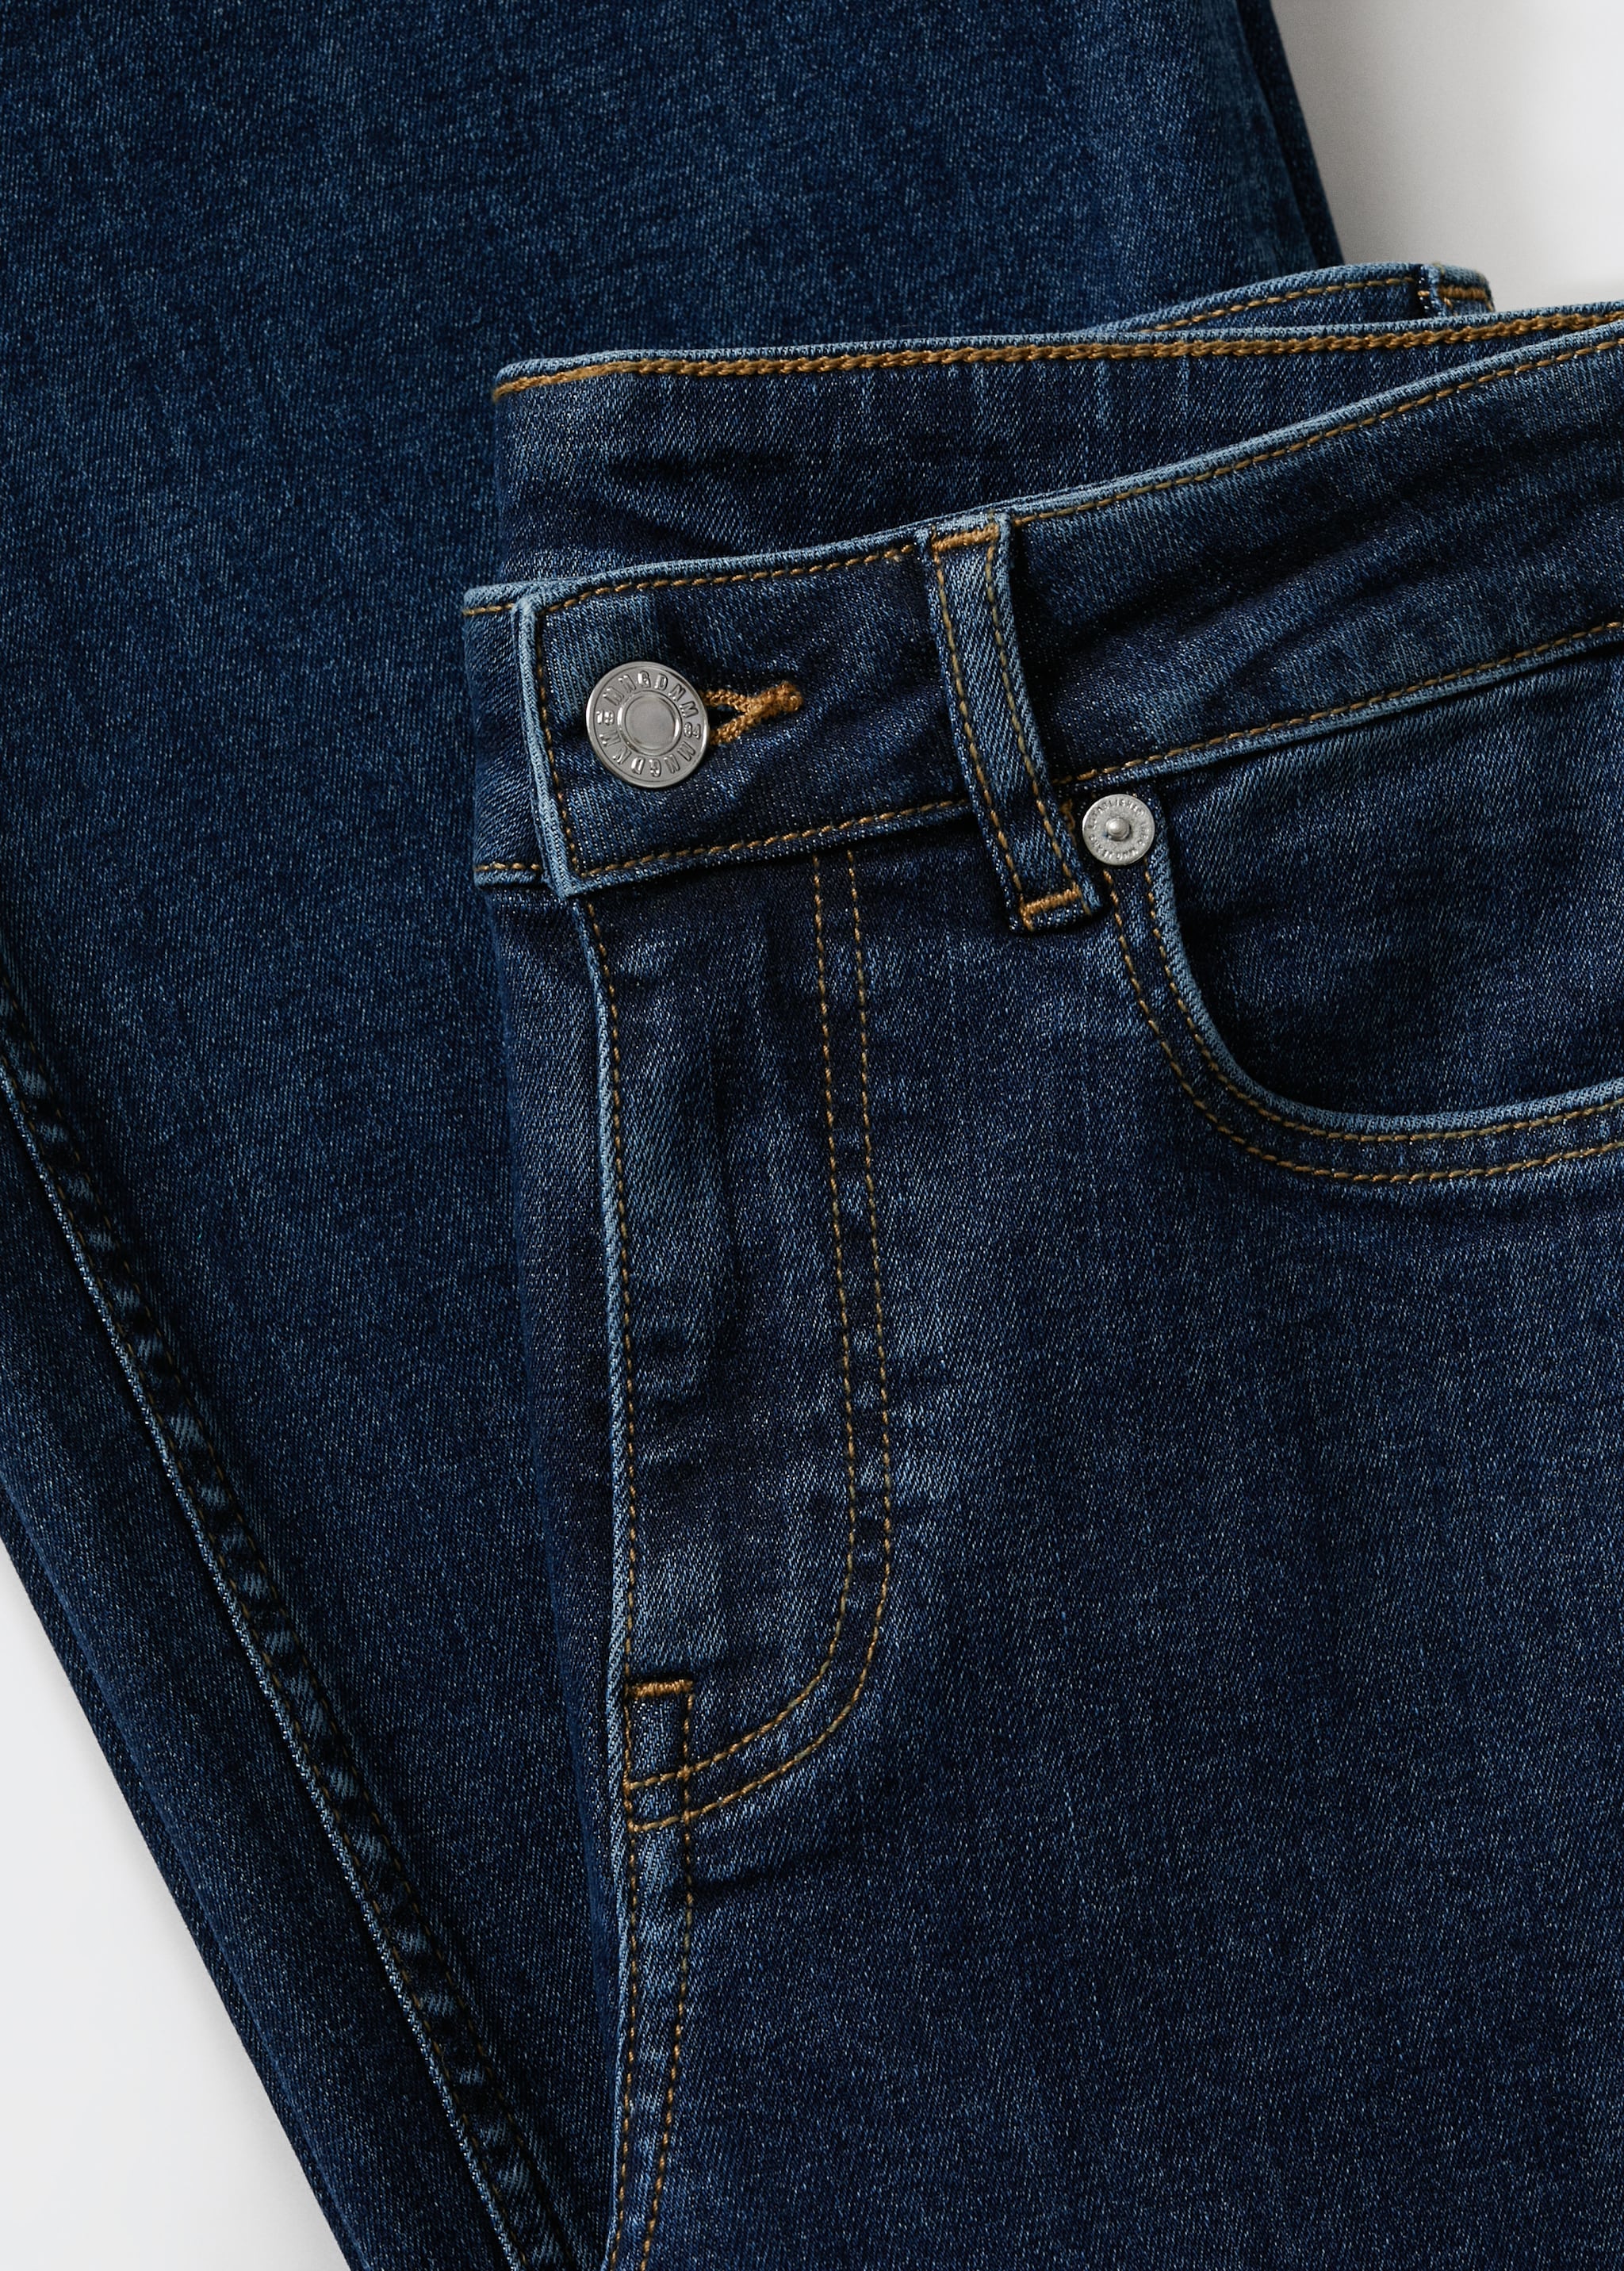 Mid-rise flared jeans - Details of the article 8